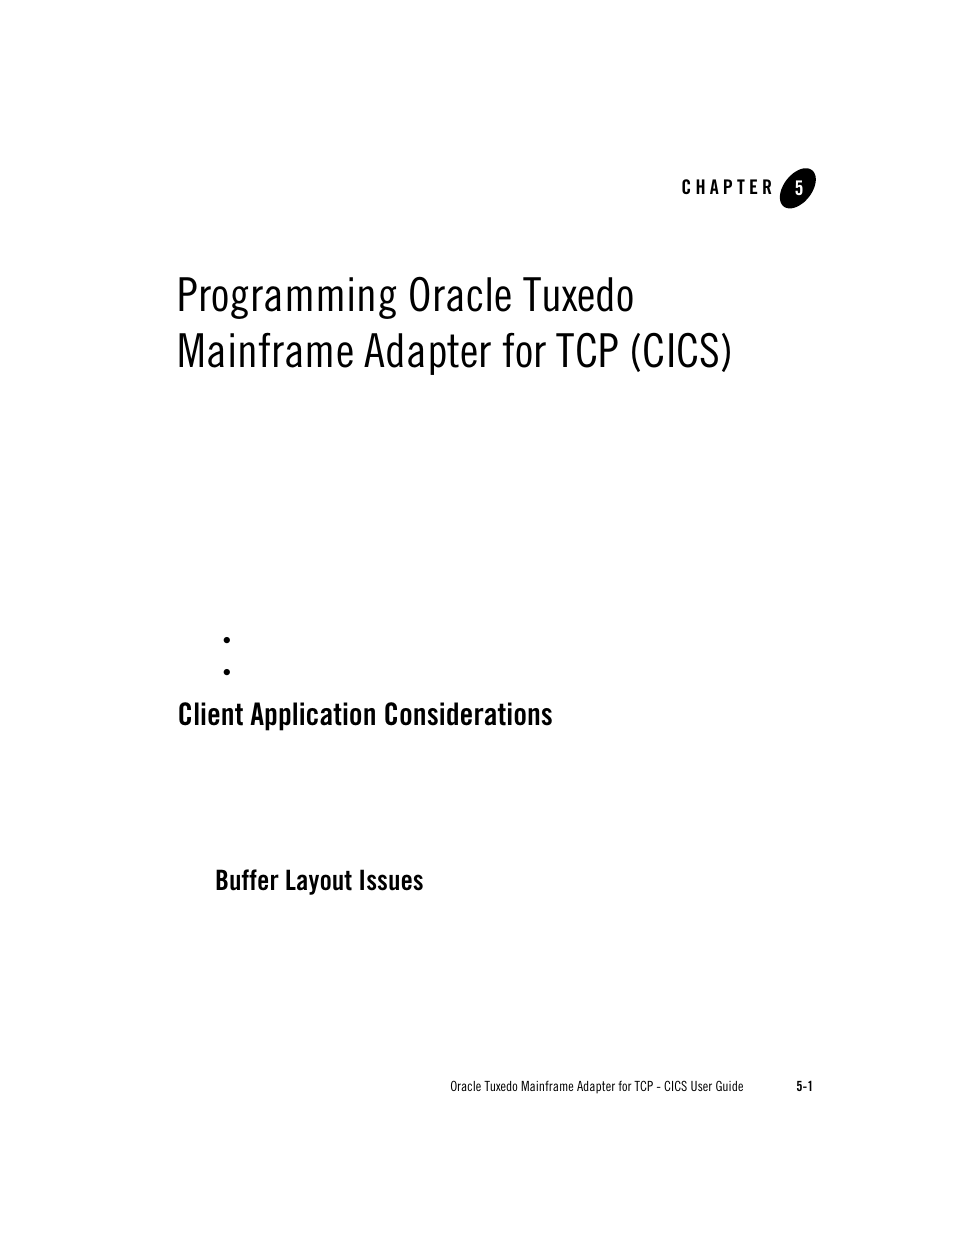 Client application considerations, Buffer layout issues | Oracle Audio Technologies Oracle Tuxedo User Manual | Page 89 / 112